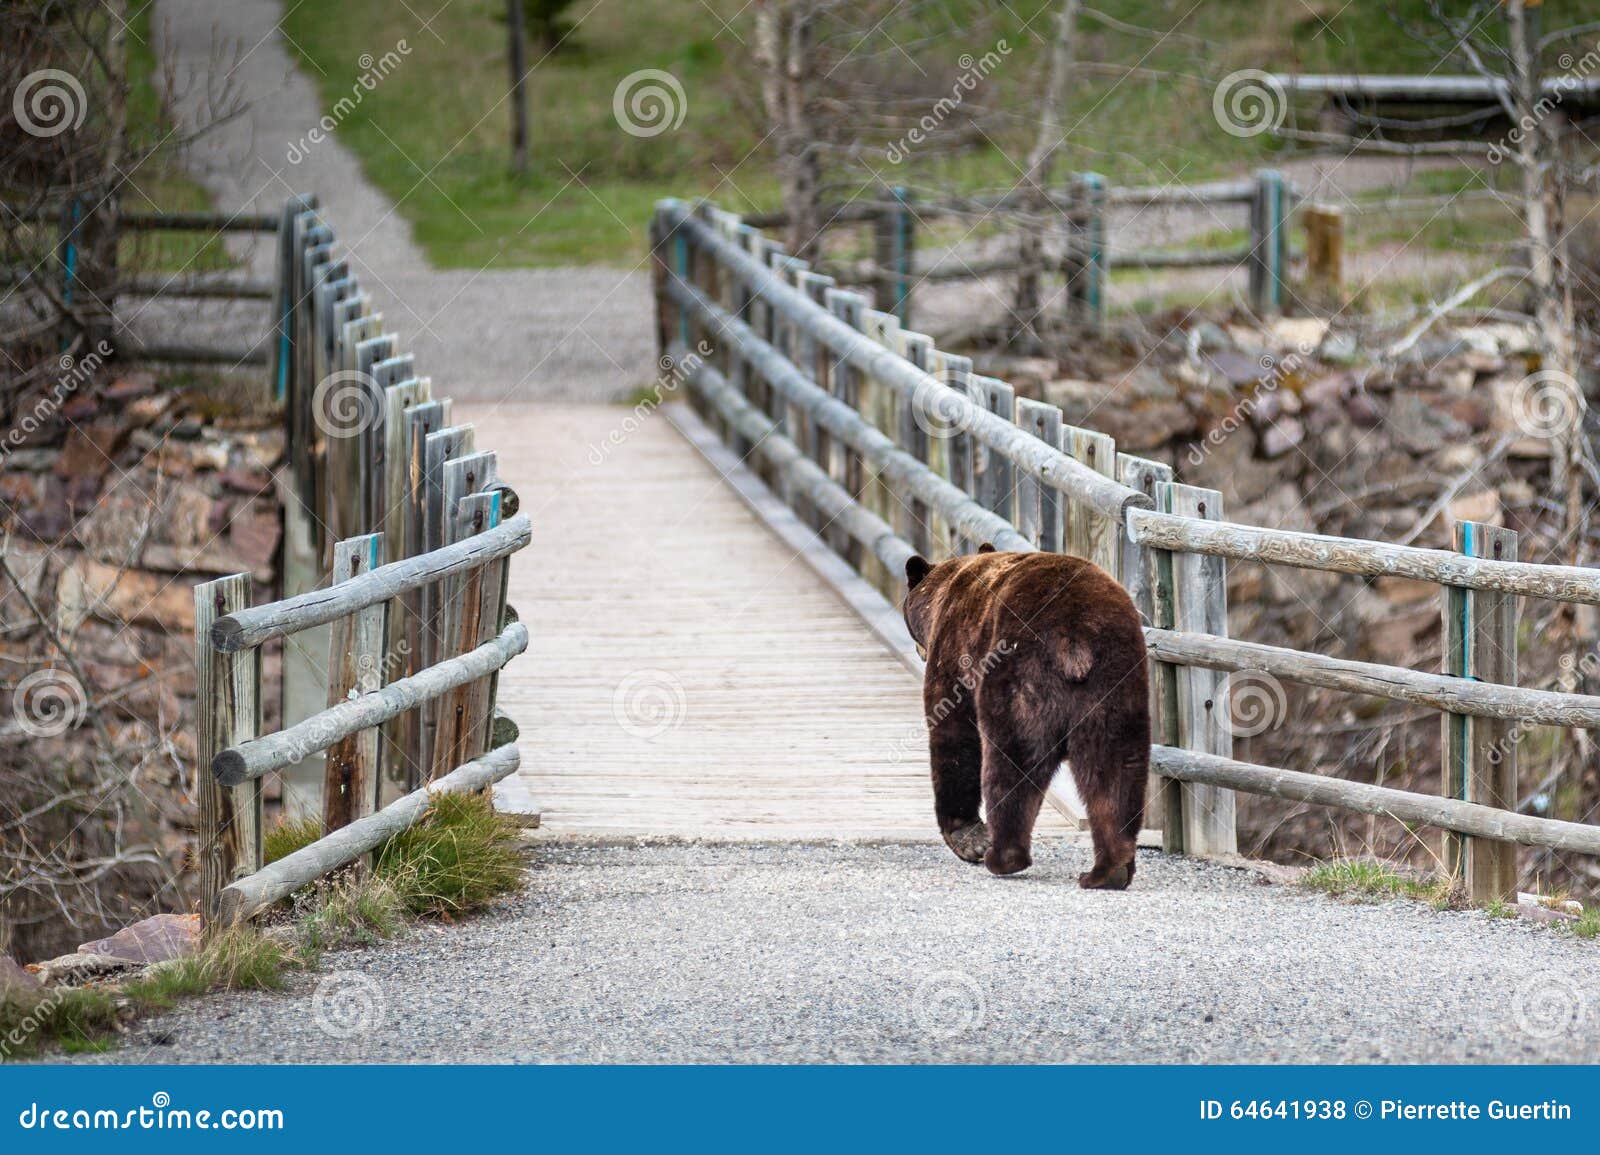 grizzly bear encounter 4